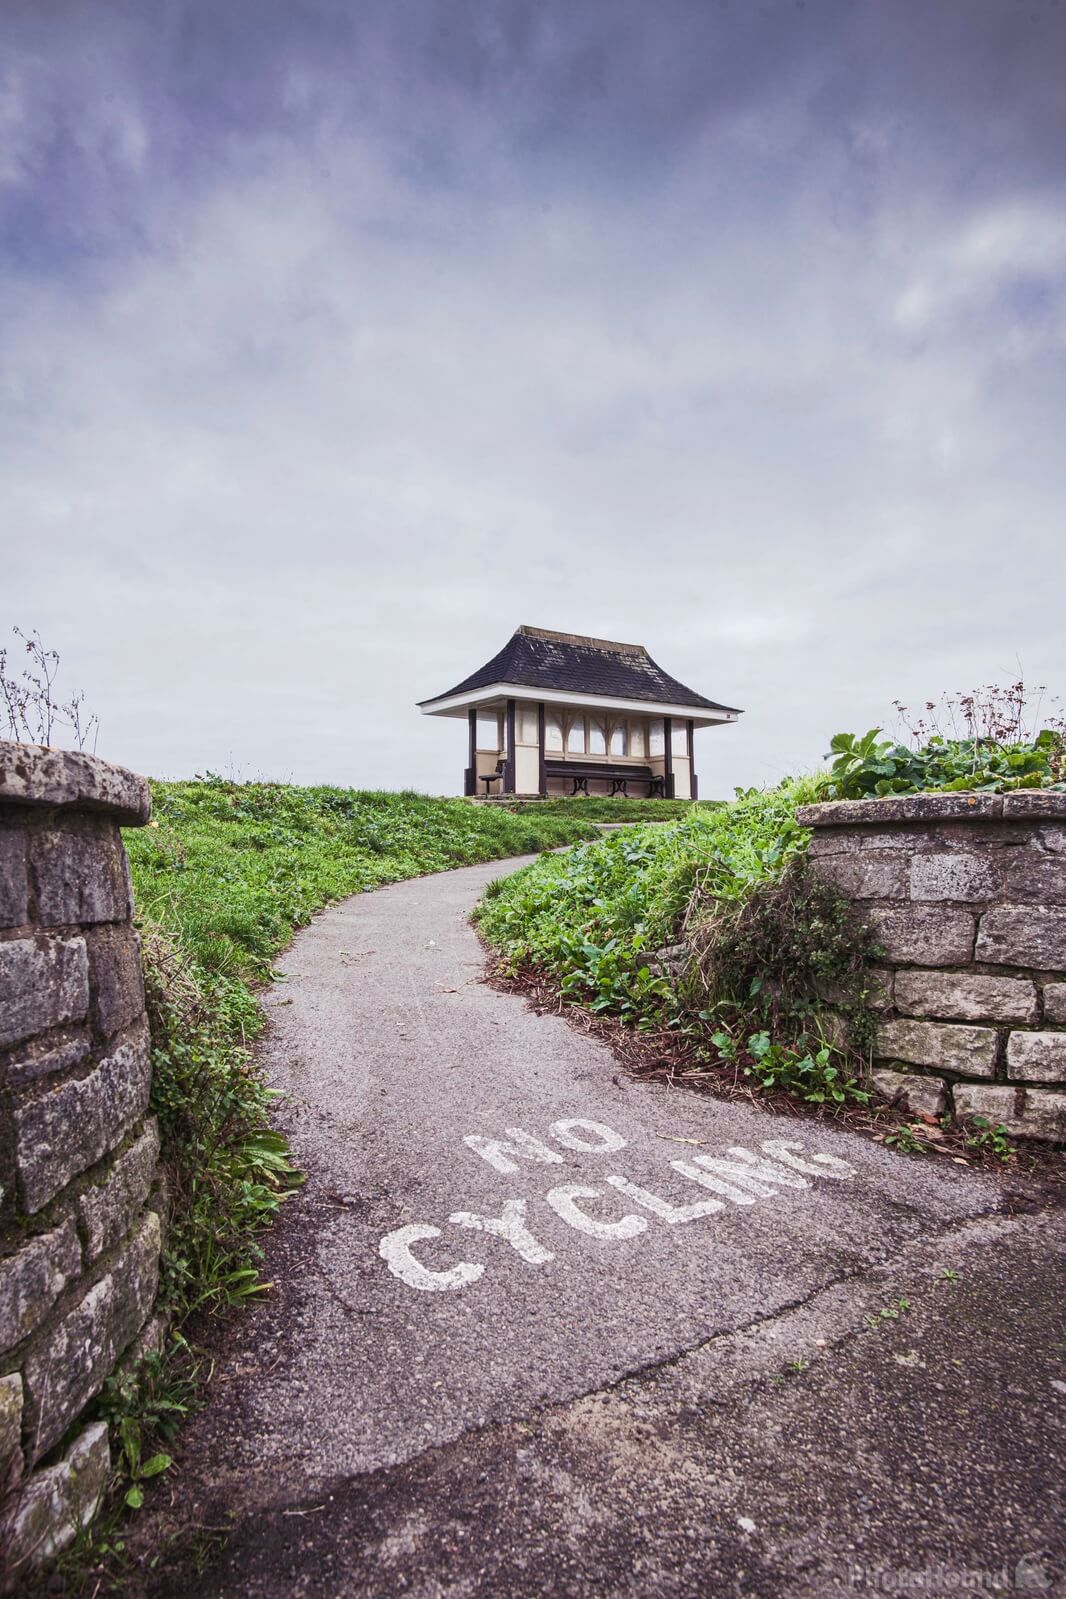 Image of Southbourne Victorian Seafront Shelter by michael bennett